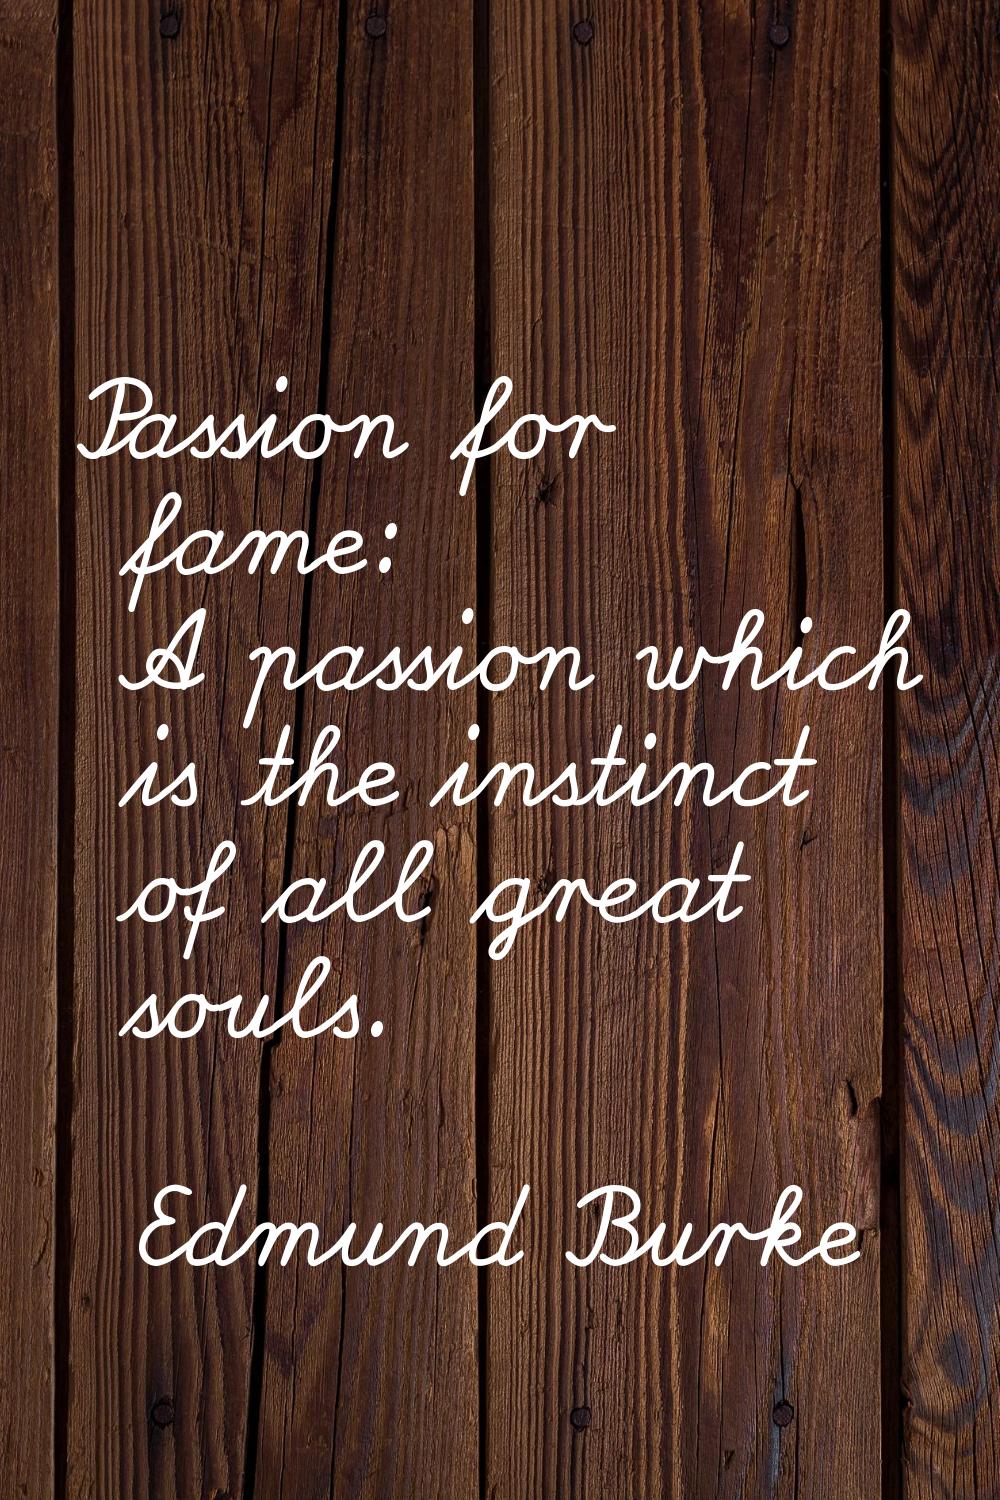 Passion for fame: A passion which is the instinct of all great souls.